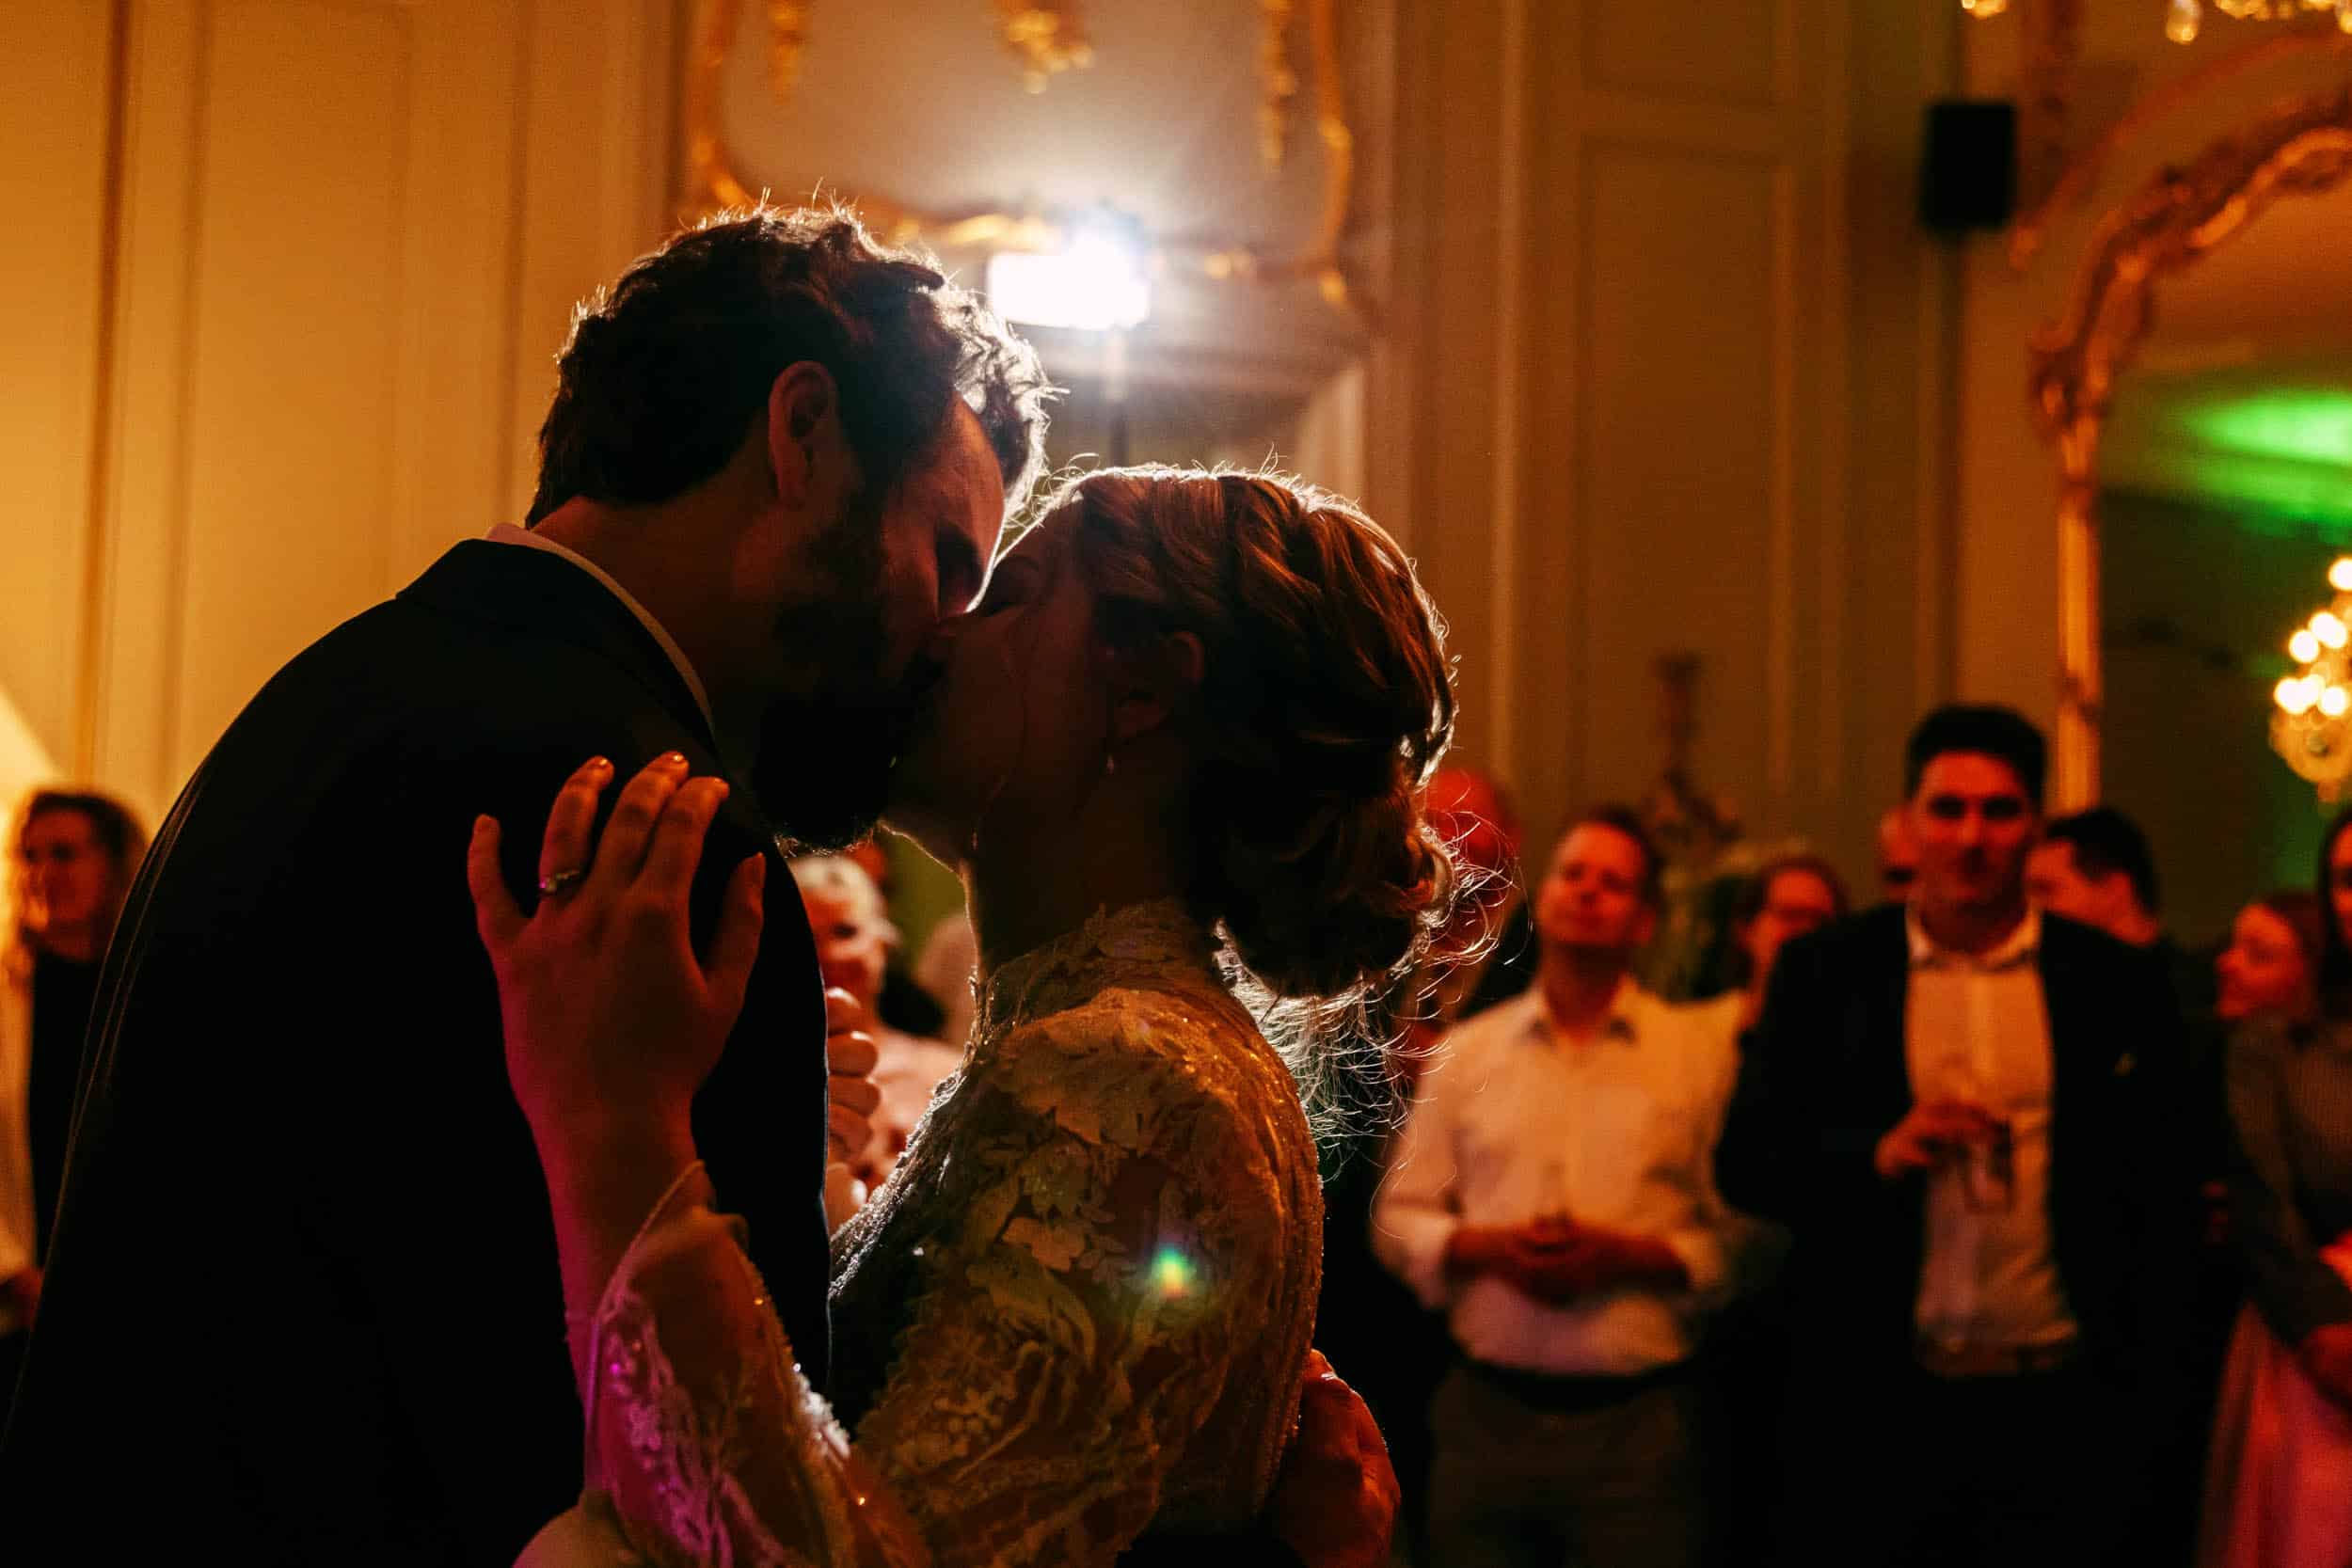 The perfect wedding photo of a bride and groom sharing a kiss in a ballroom, captured by the wedding photographer.